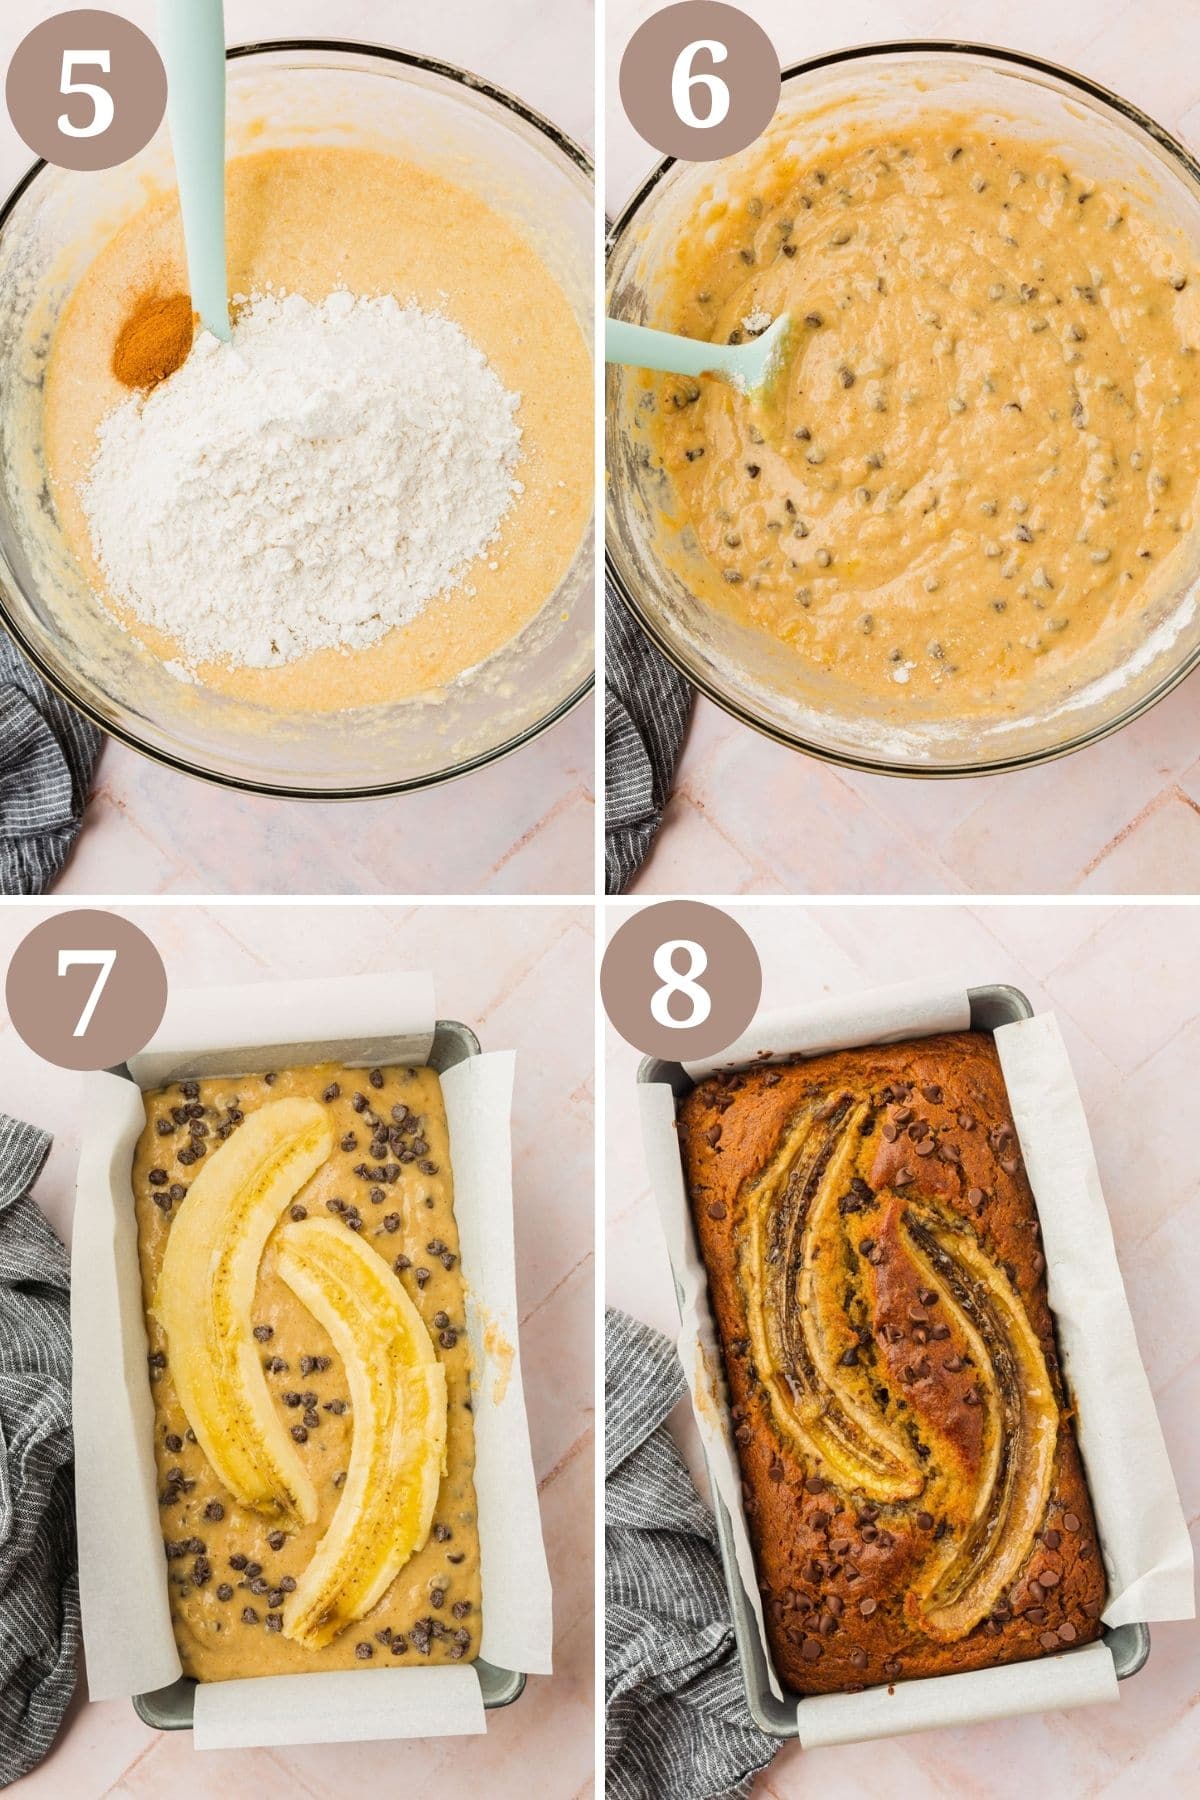 Steps 5-8 for making gluten-free banana bread with chocolate chips.